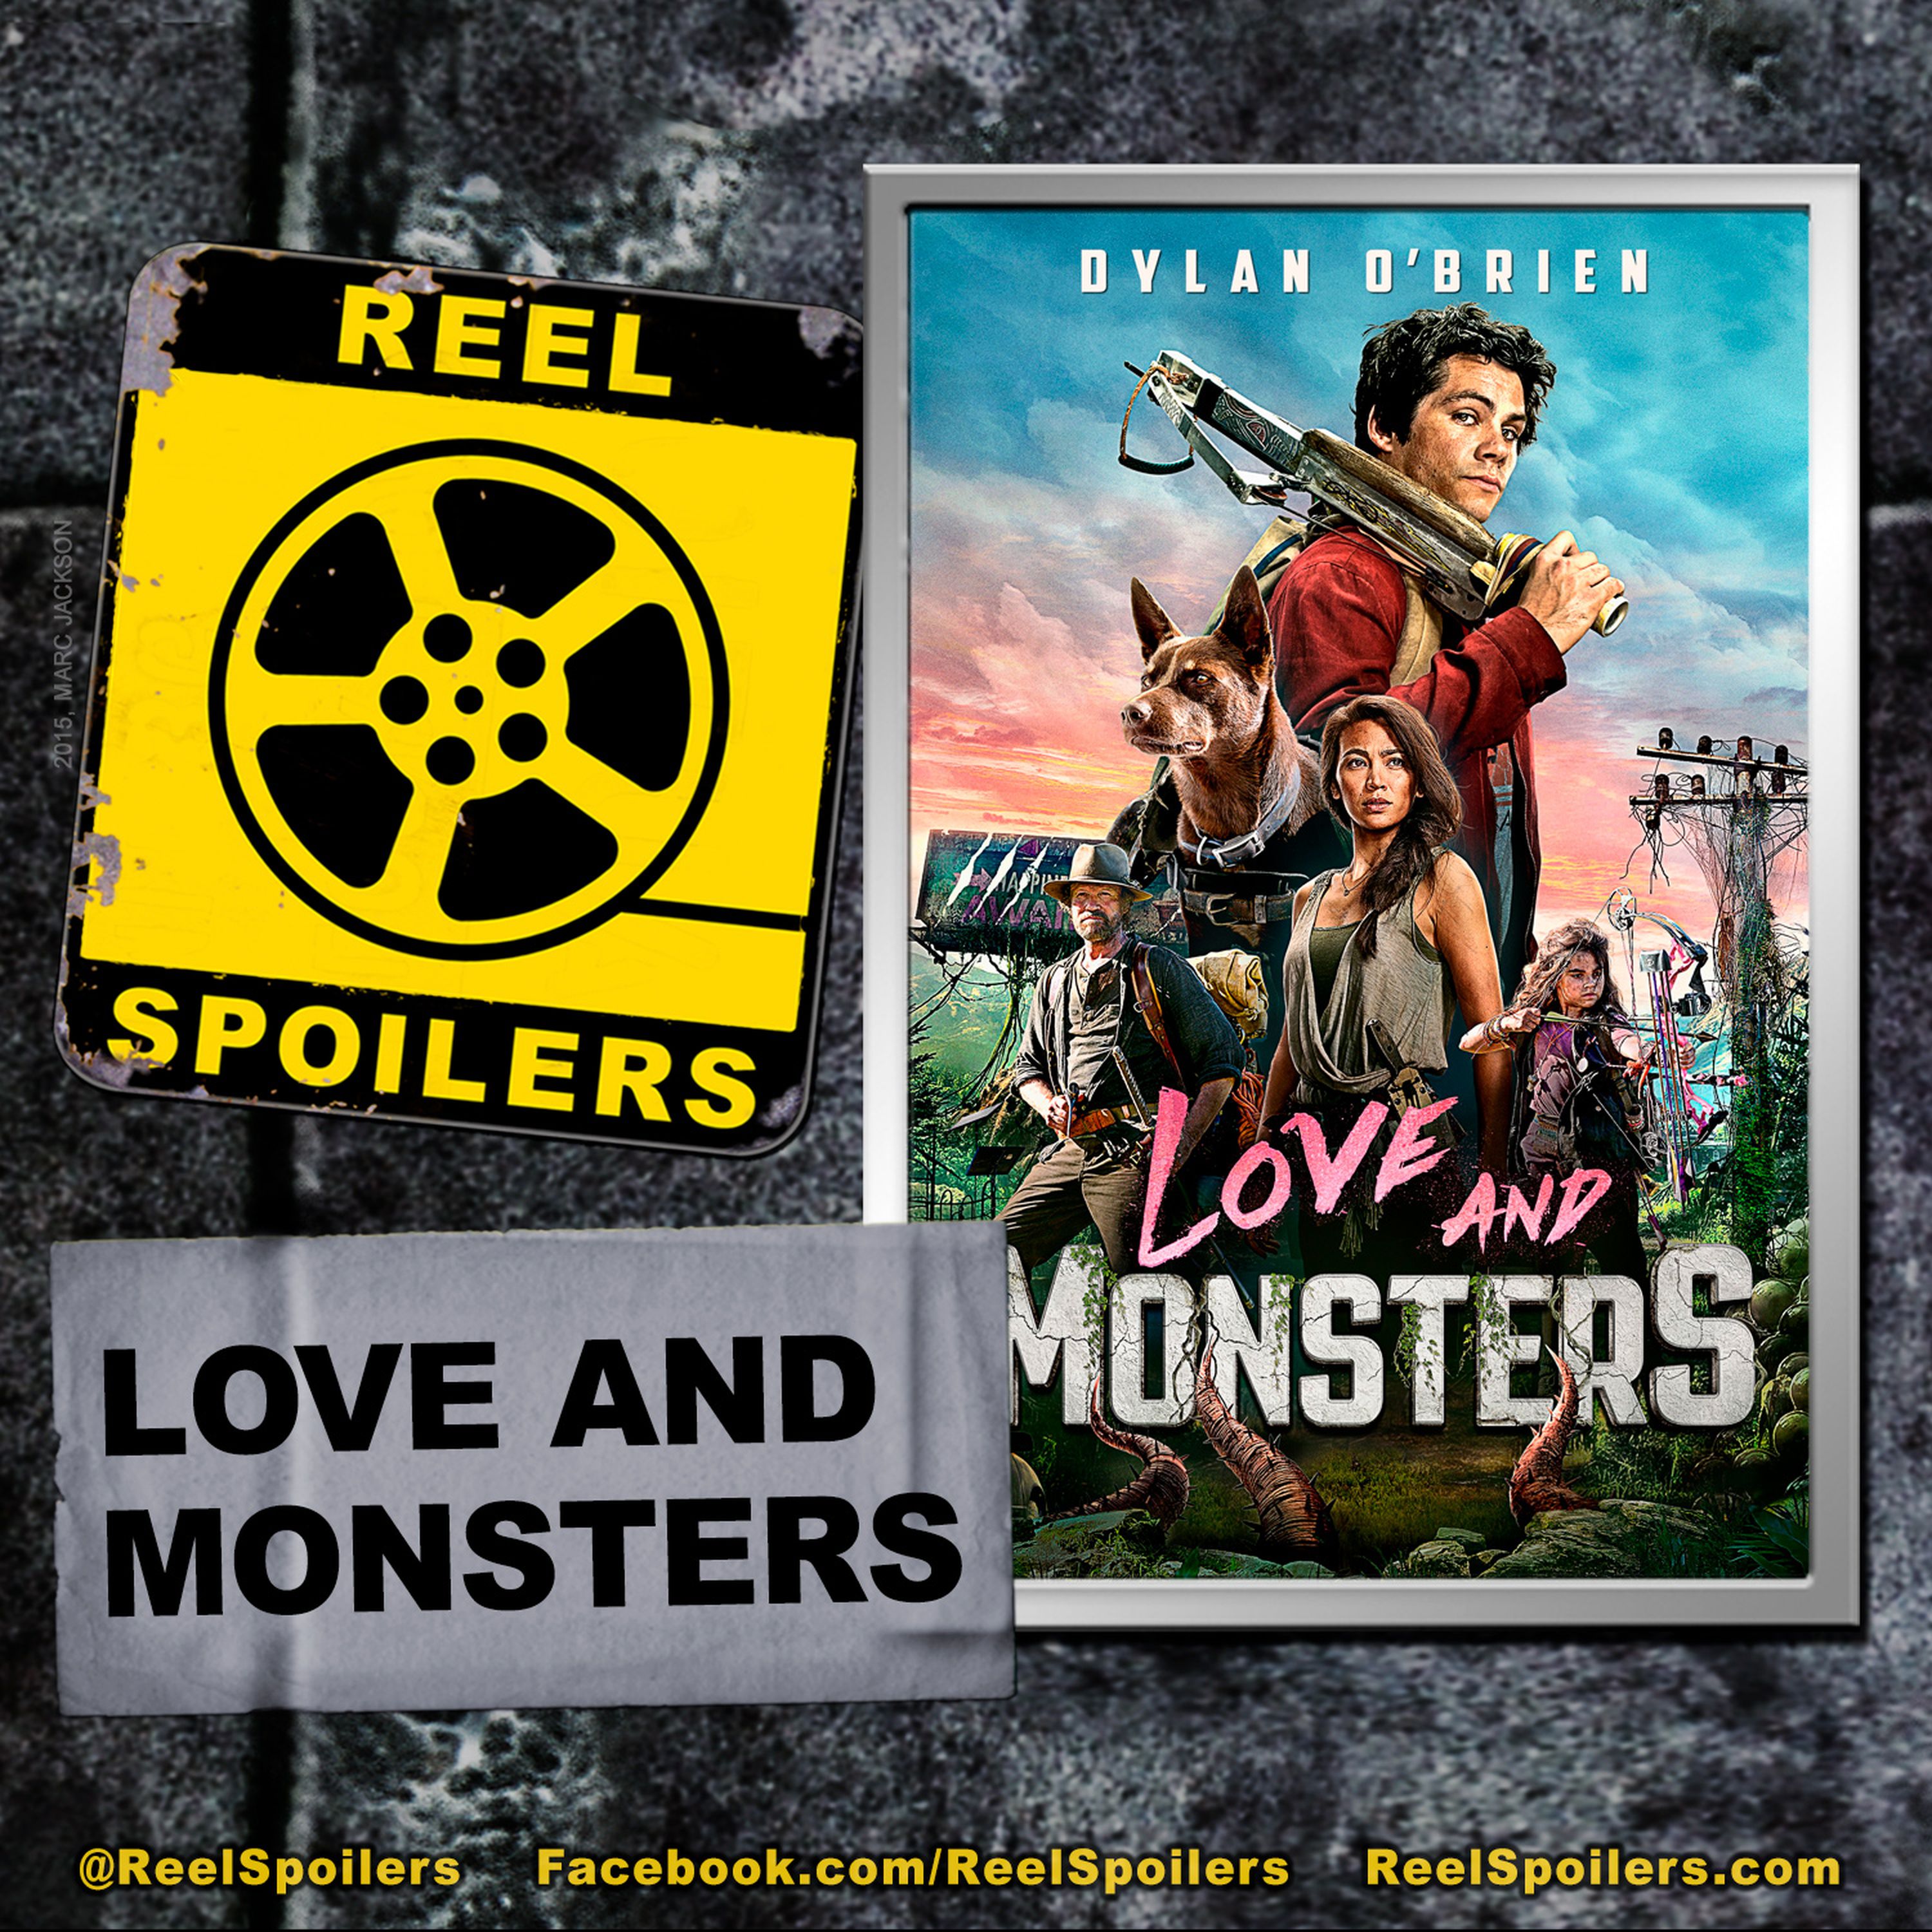 LOVE AND MONSTERS Starring Dylan O'Brien, Jessica Henwick, Michael Rooker Image